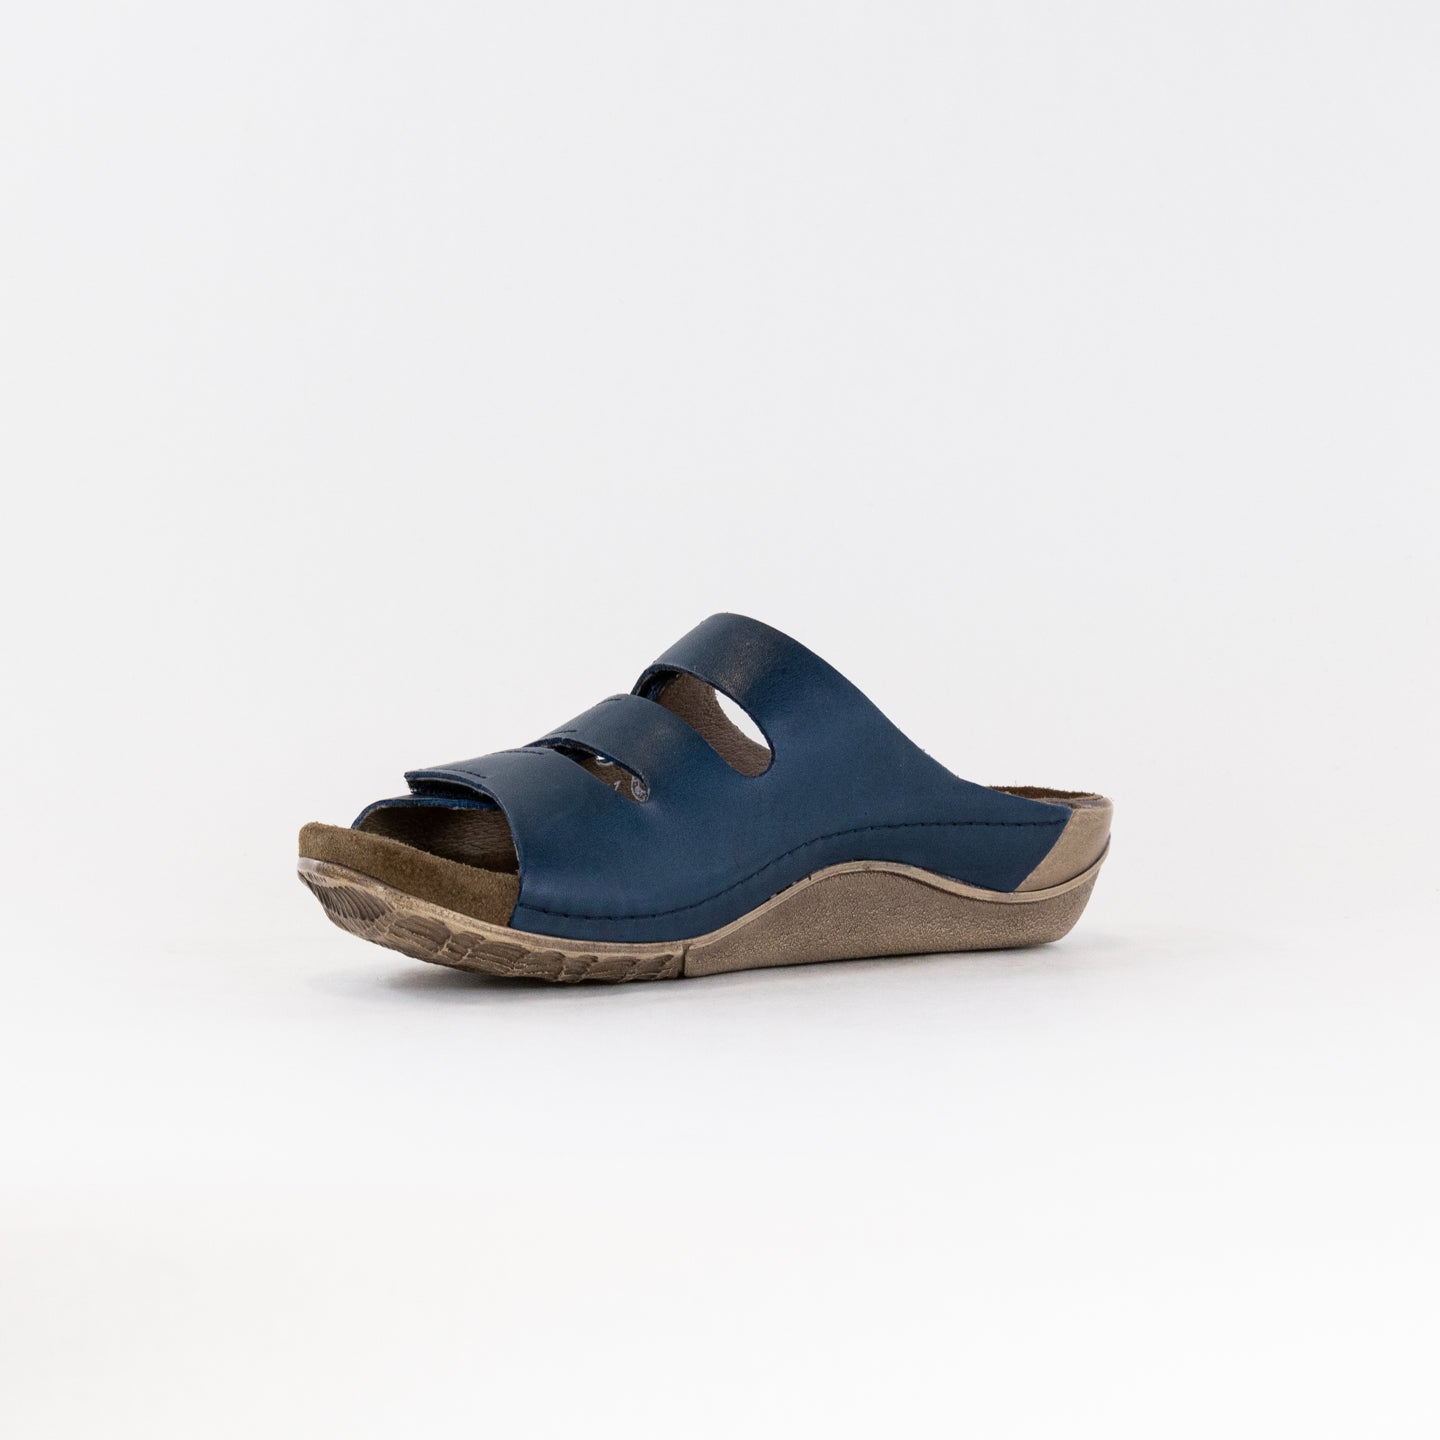 Wolky Nomad (Women's) - Blue